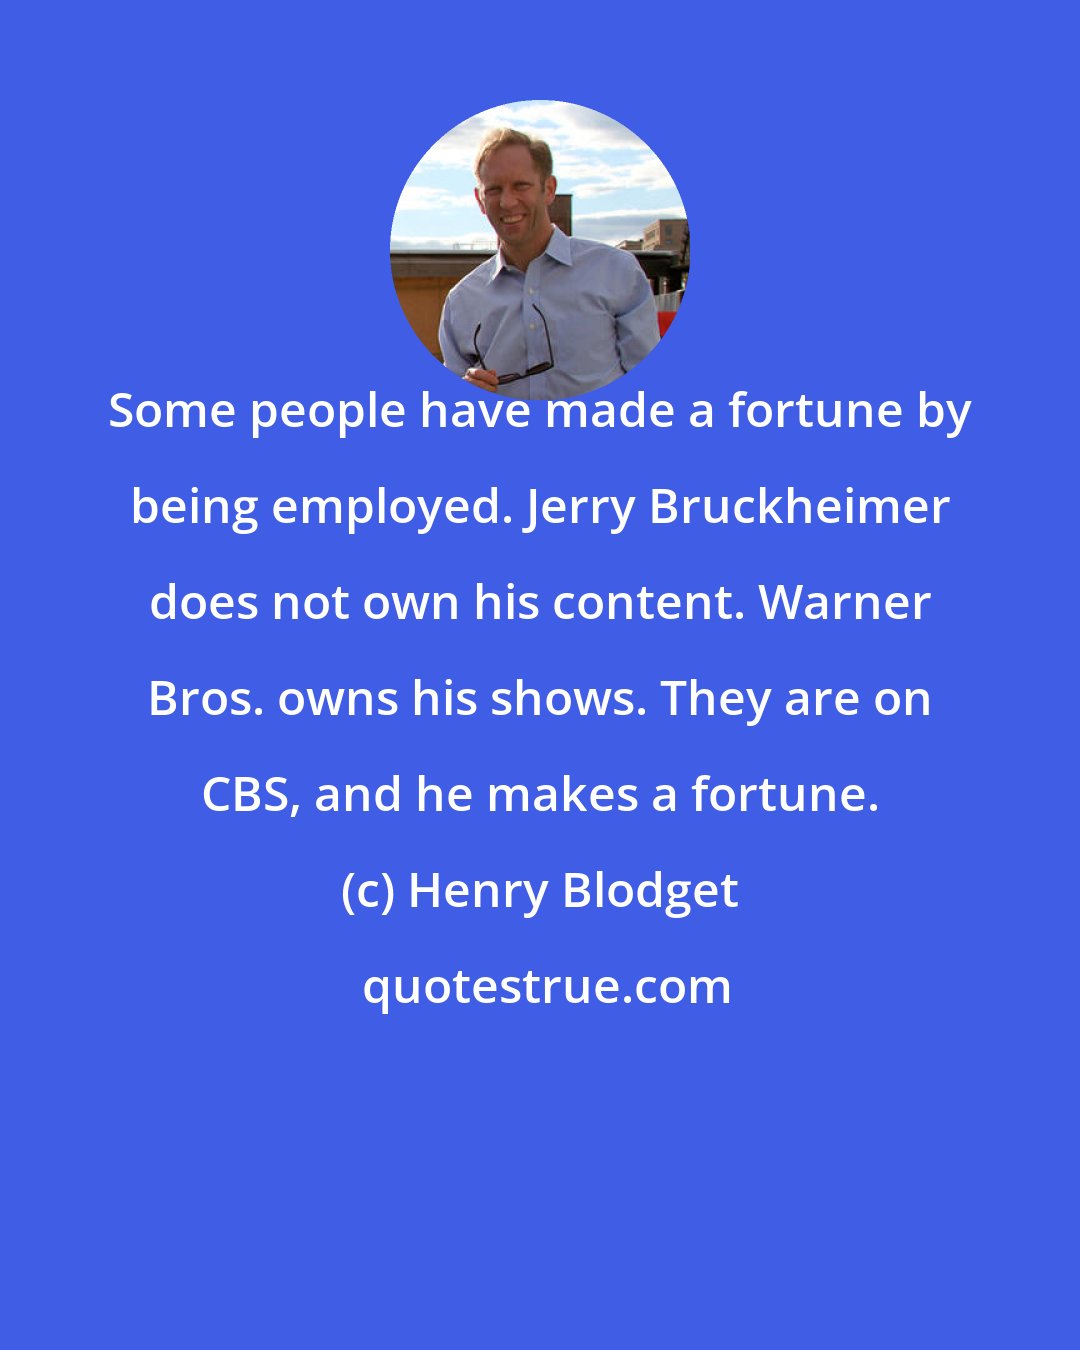 Henry Blodget: Some people have made a fortune by being employed. Jerry Bruckheimer does not own his content. Warner Bros. owns his shows. They are on CBS, and he makes a fortune.